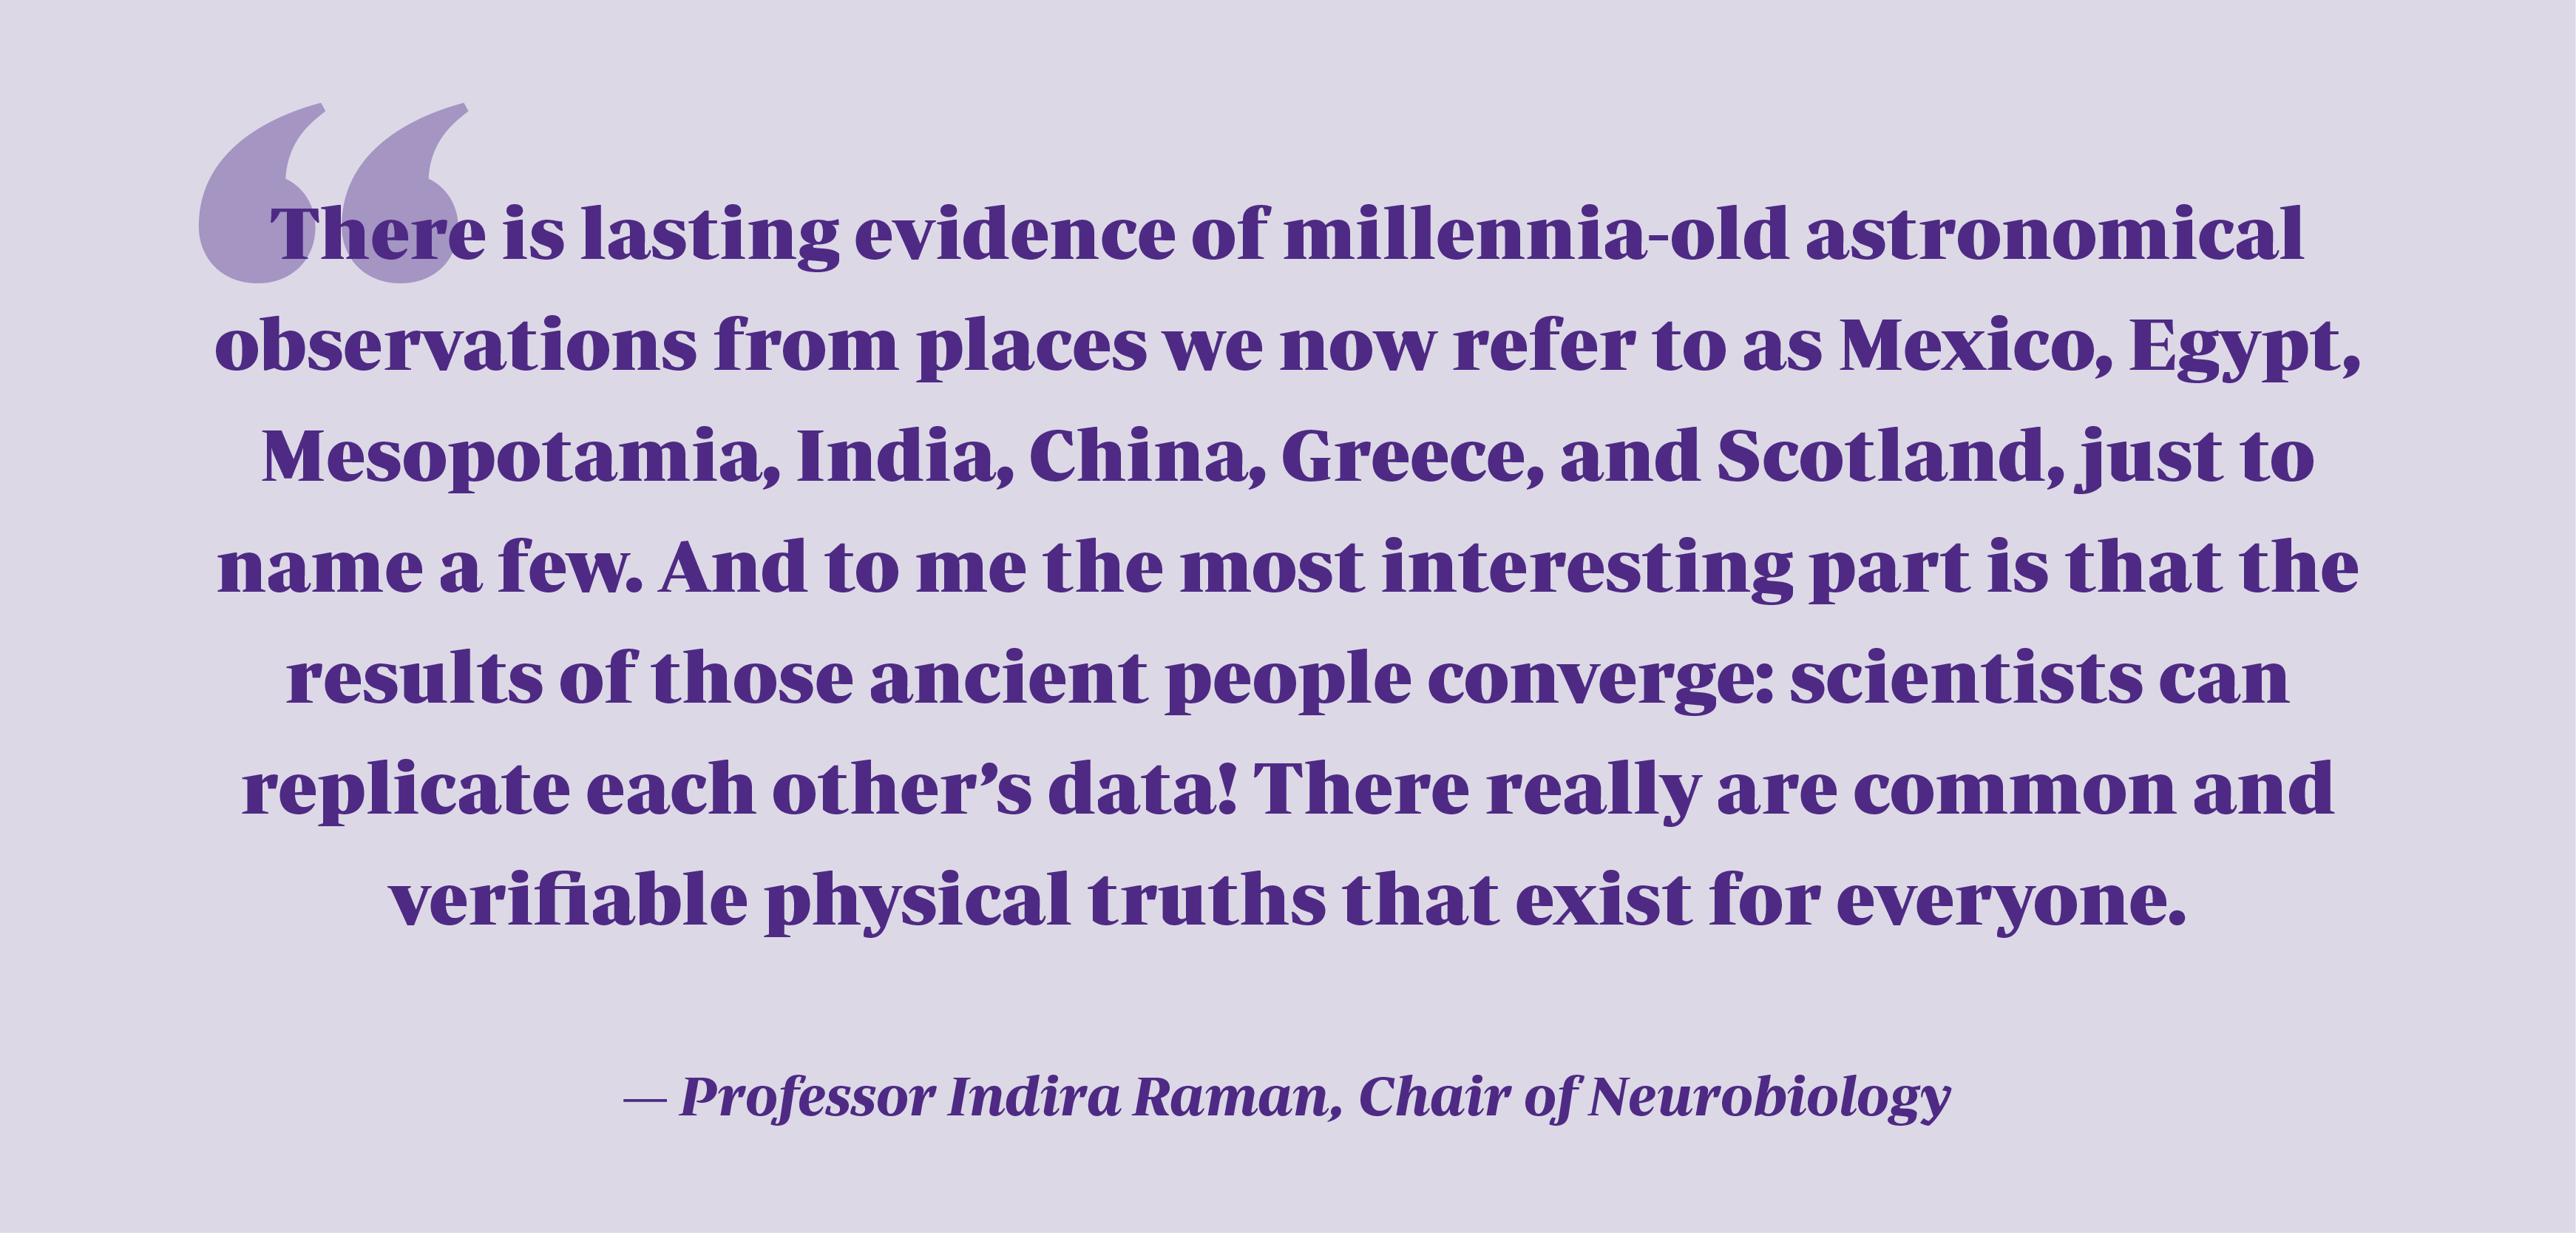 Purple quote on light purple background reads "There is lasting evidence of millennia-old astronomical observations from places we now refer to as Mexico, Egypt, Mesopotamia, India, China, Greece, and Scotland, just to name a few. And to me the most interesting part is that the results of those ancient people converge: scientists can replicate each other’s data! There really are common and verifiable physical truths that exist for everyone."